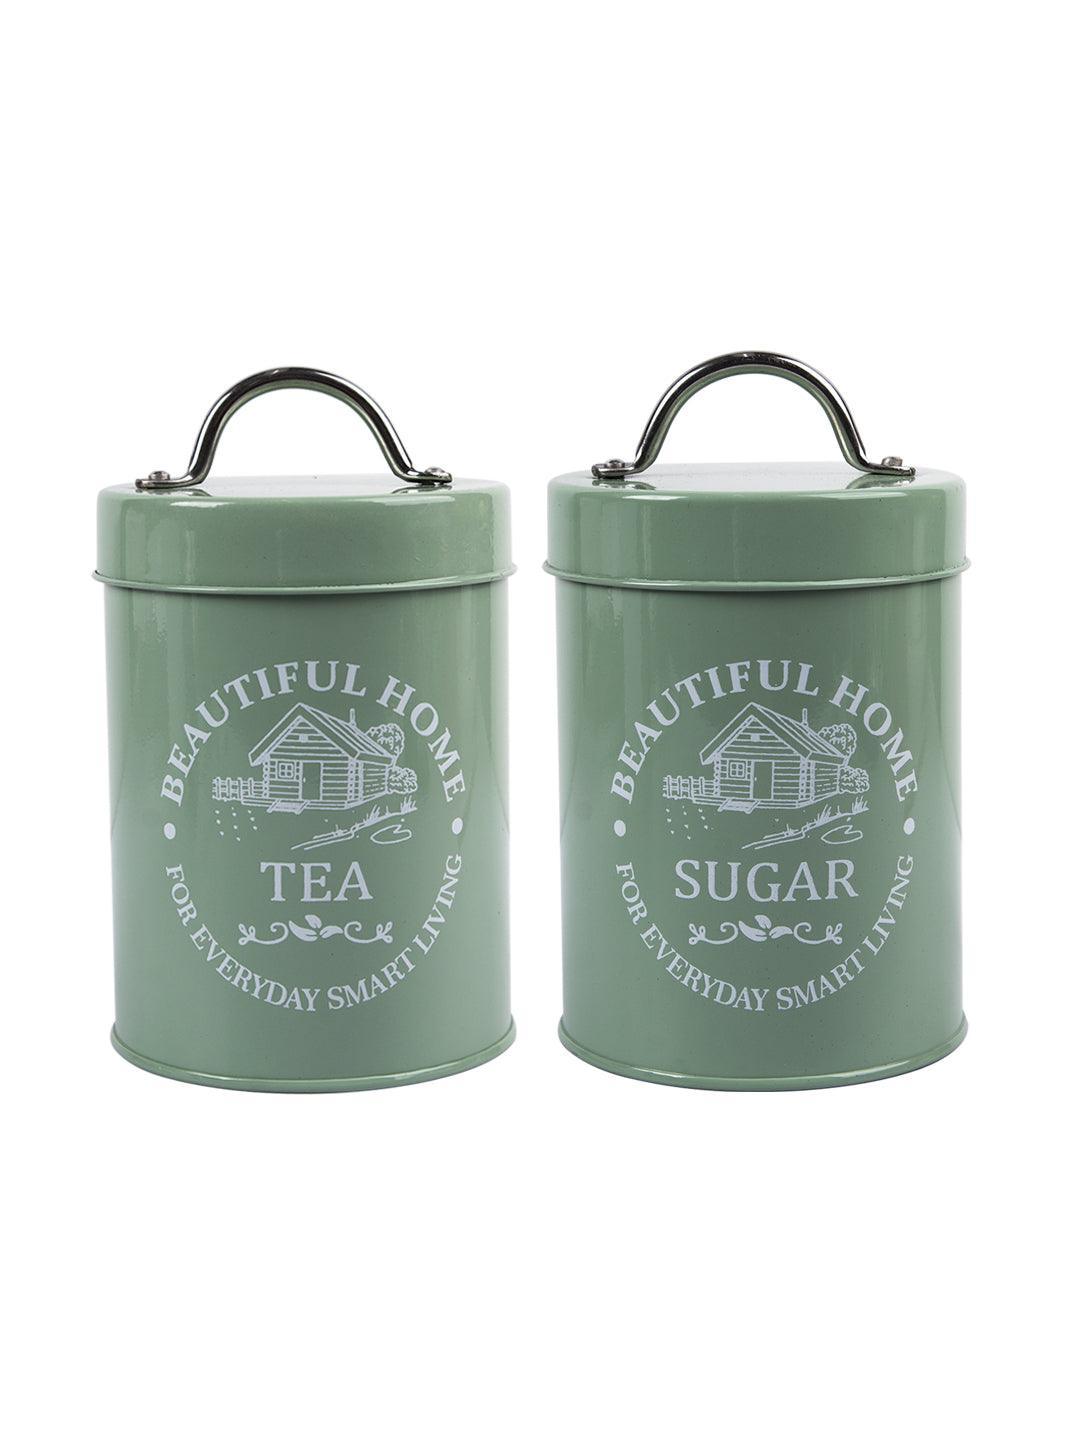 https://cdn.shopify.com/s/files/1/0267/1699/5754/files/market99-tea-and-sugar-storage-jar-with-lid-set-of-2-each-850ml-food-storage-containers-2-29022518378666.jpg?v=1697015047&width=1080